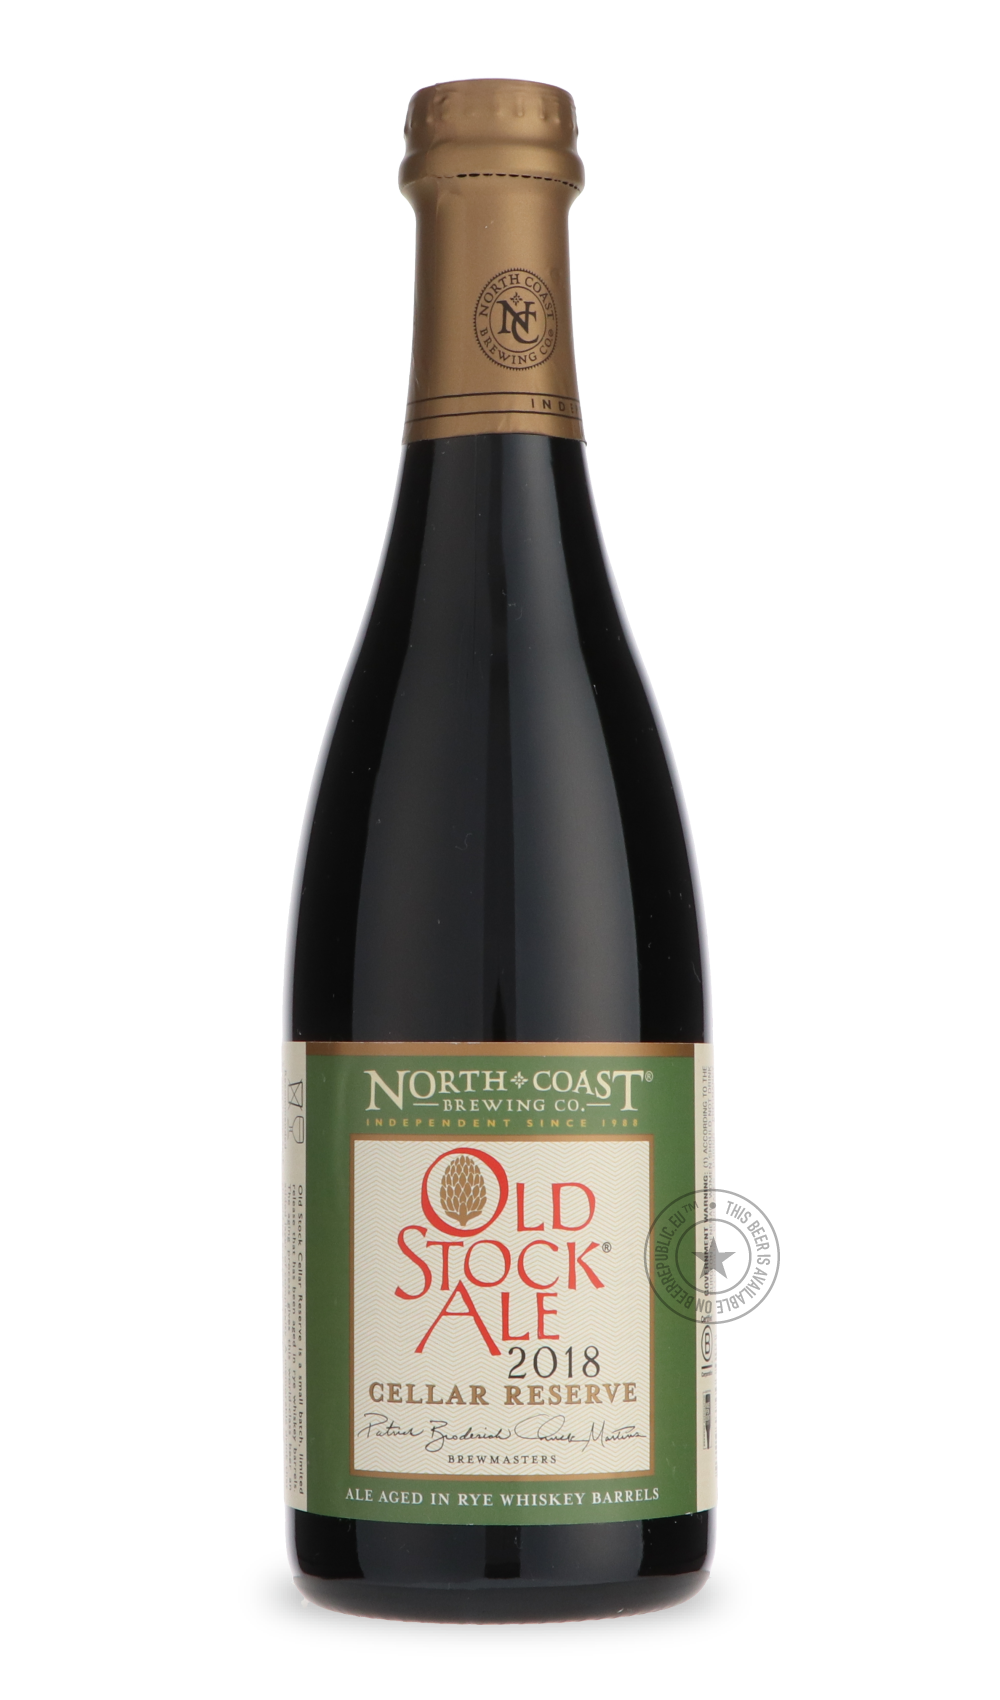 -North Coast- Old Stock Ale Cellar Reserve - 2018-Brown & Dark- Only @ Beer Republic - The best online beer store for American & Canadian craft beer - Buy beer online from the USA and Canada - Bier online kopen - Amerikaans bier kopen - Craft beer store - Craft beer kopen - Amerikanisch bier kaufen - Bier online kaufen - Acheter biere online - IPA - Stout - Porter - New England IPA - Hazy IPA - Imperial Stout - Barrel Aged - Barrel Aged Imperial Stout - Brown - Dark beer - Blond - Blonde - Pilsner - Lager -